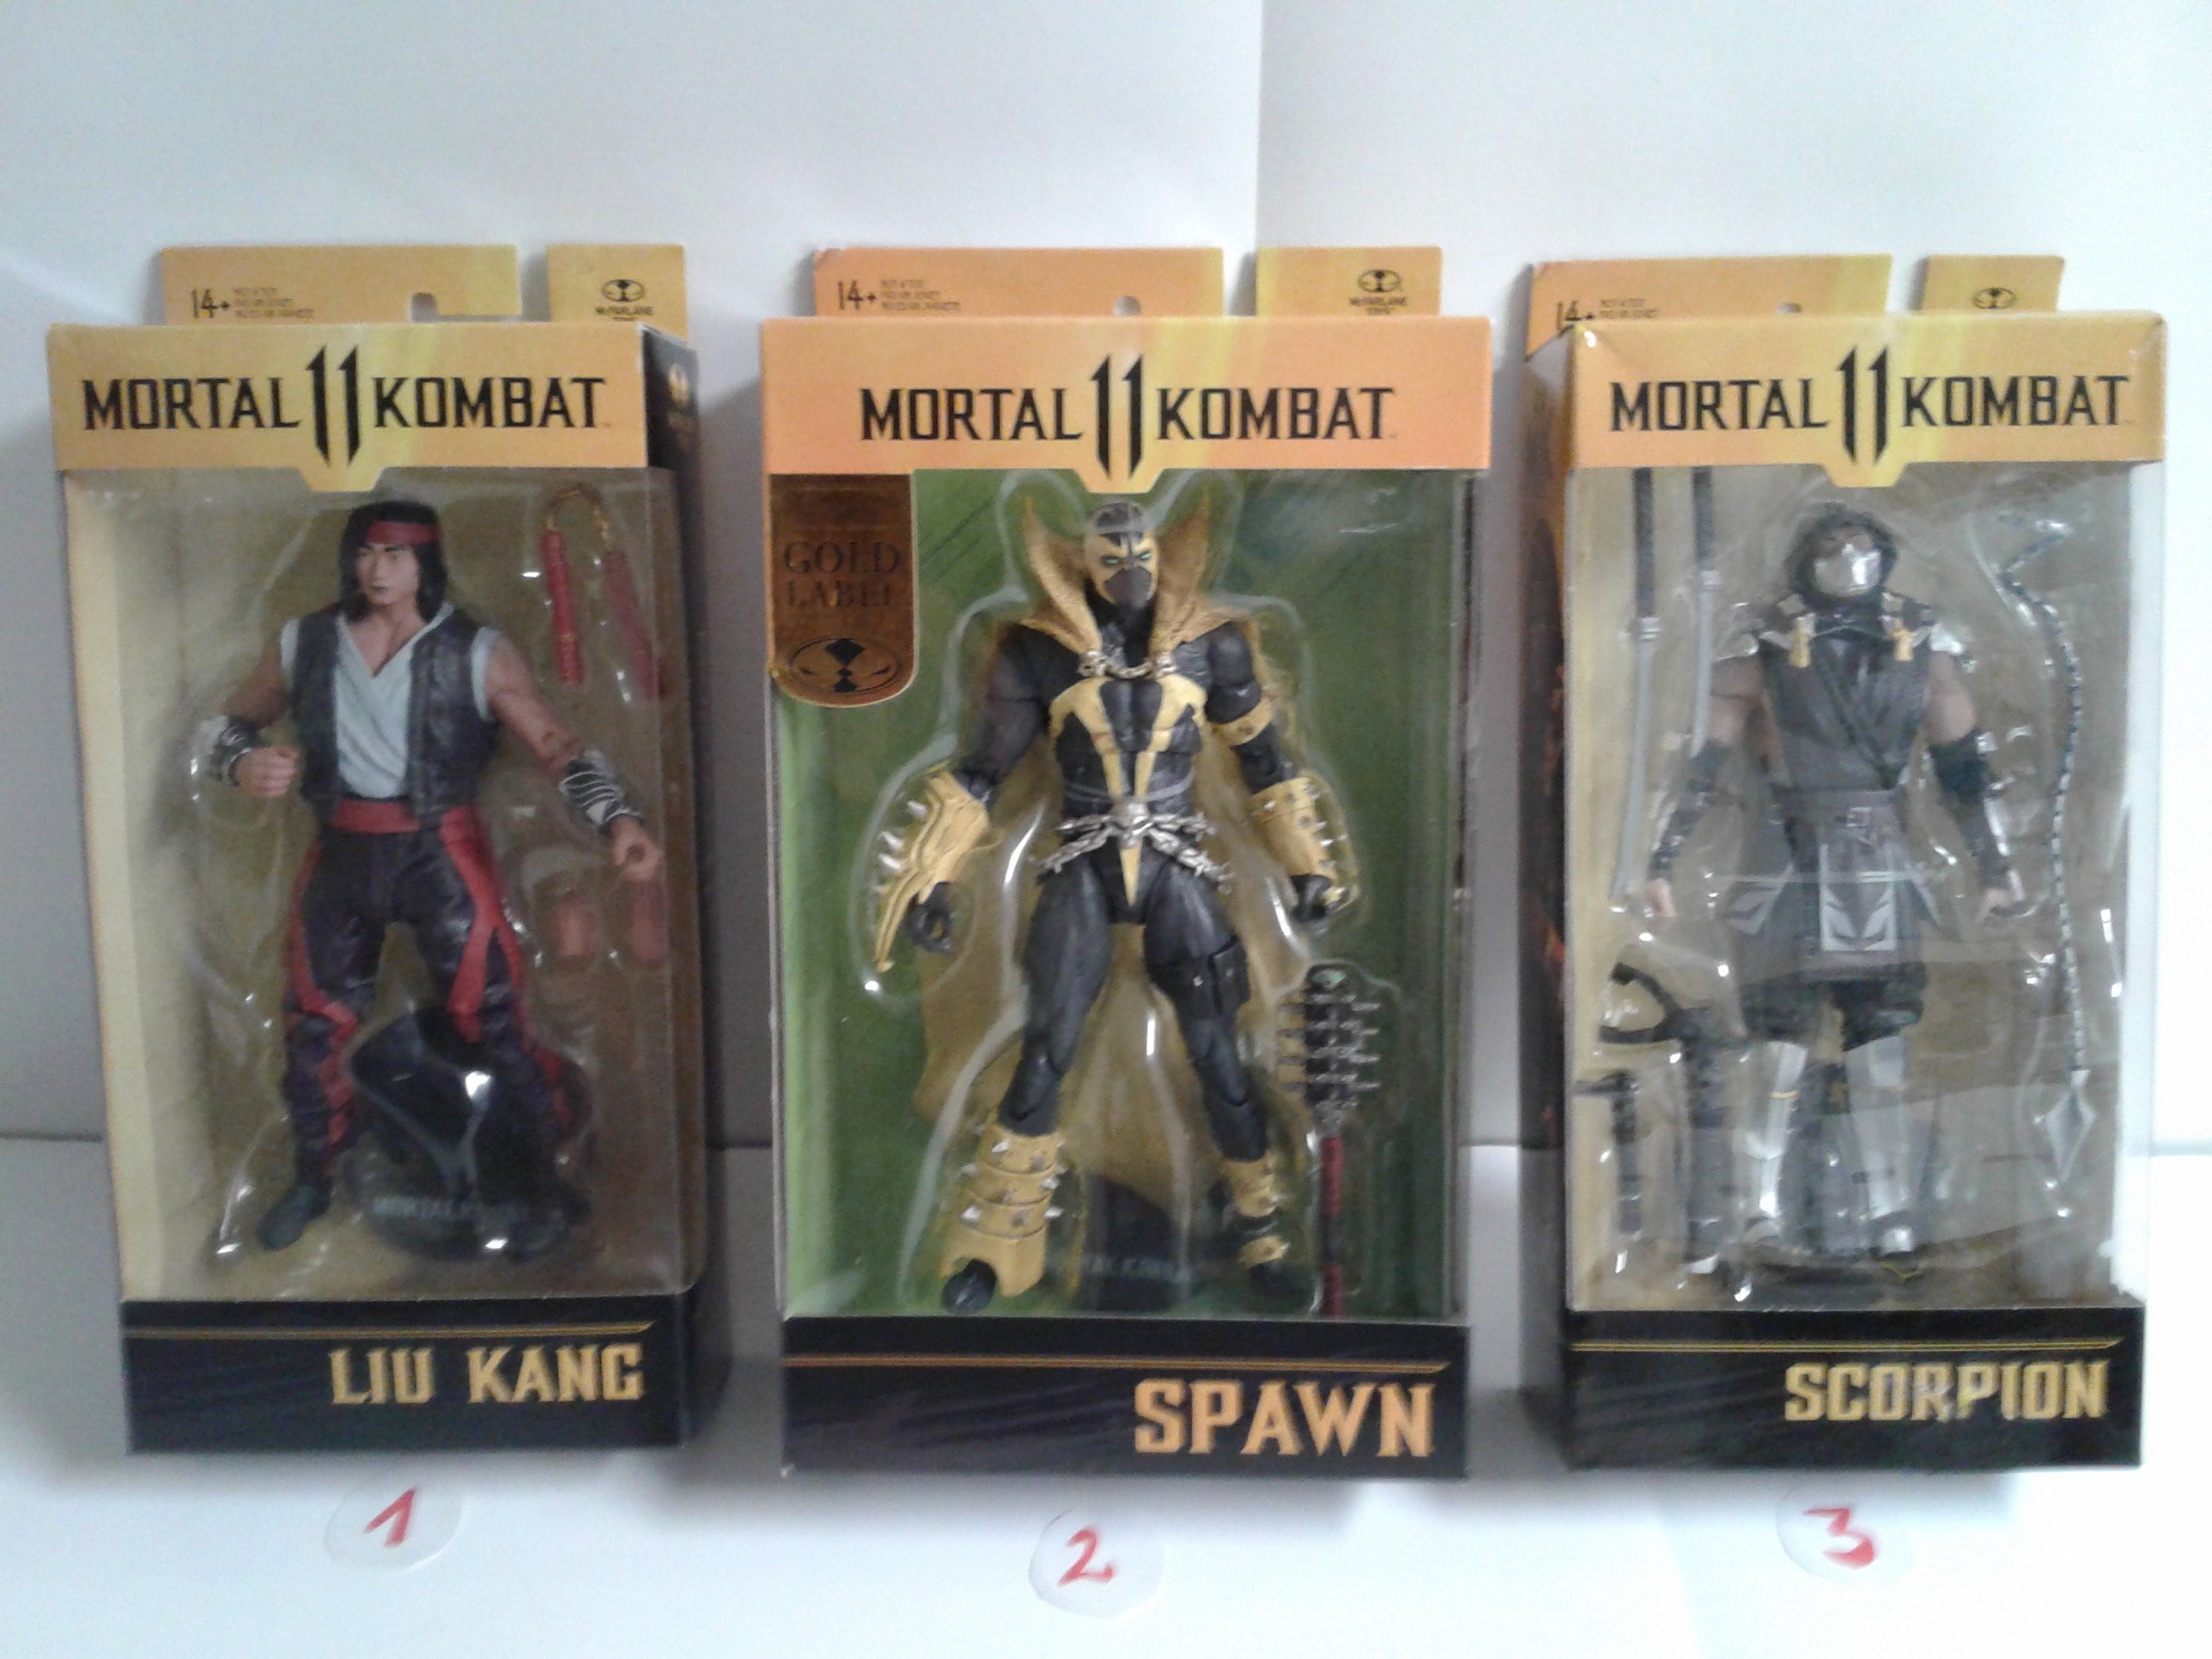 Mortal Kombat action figures - Another Toy Review by Michael